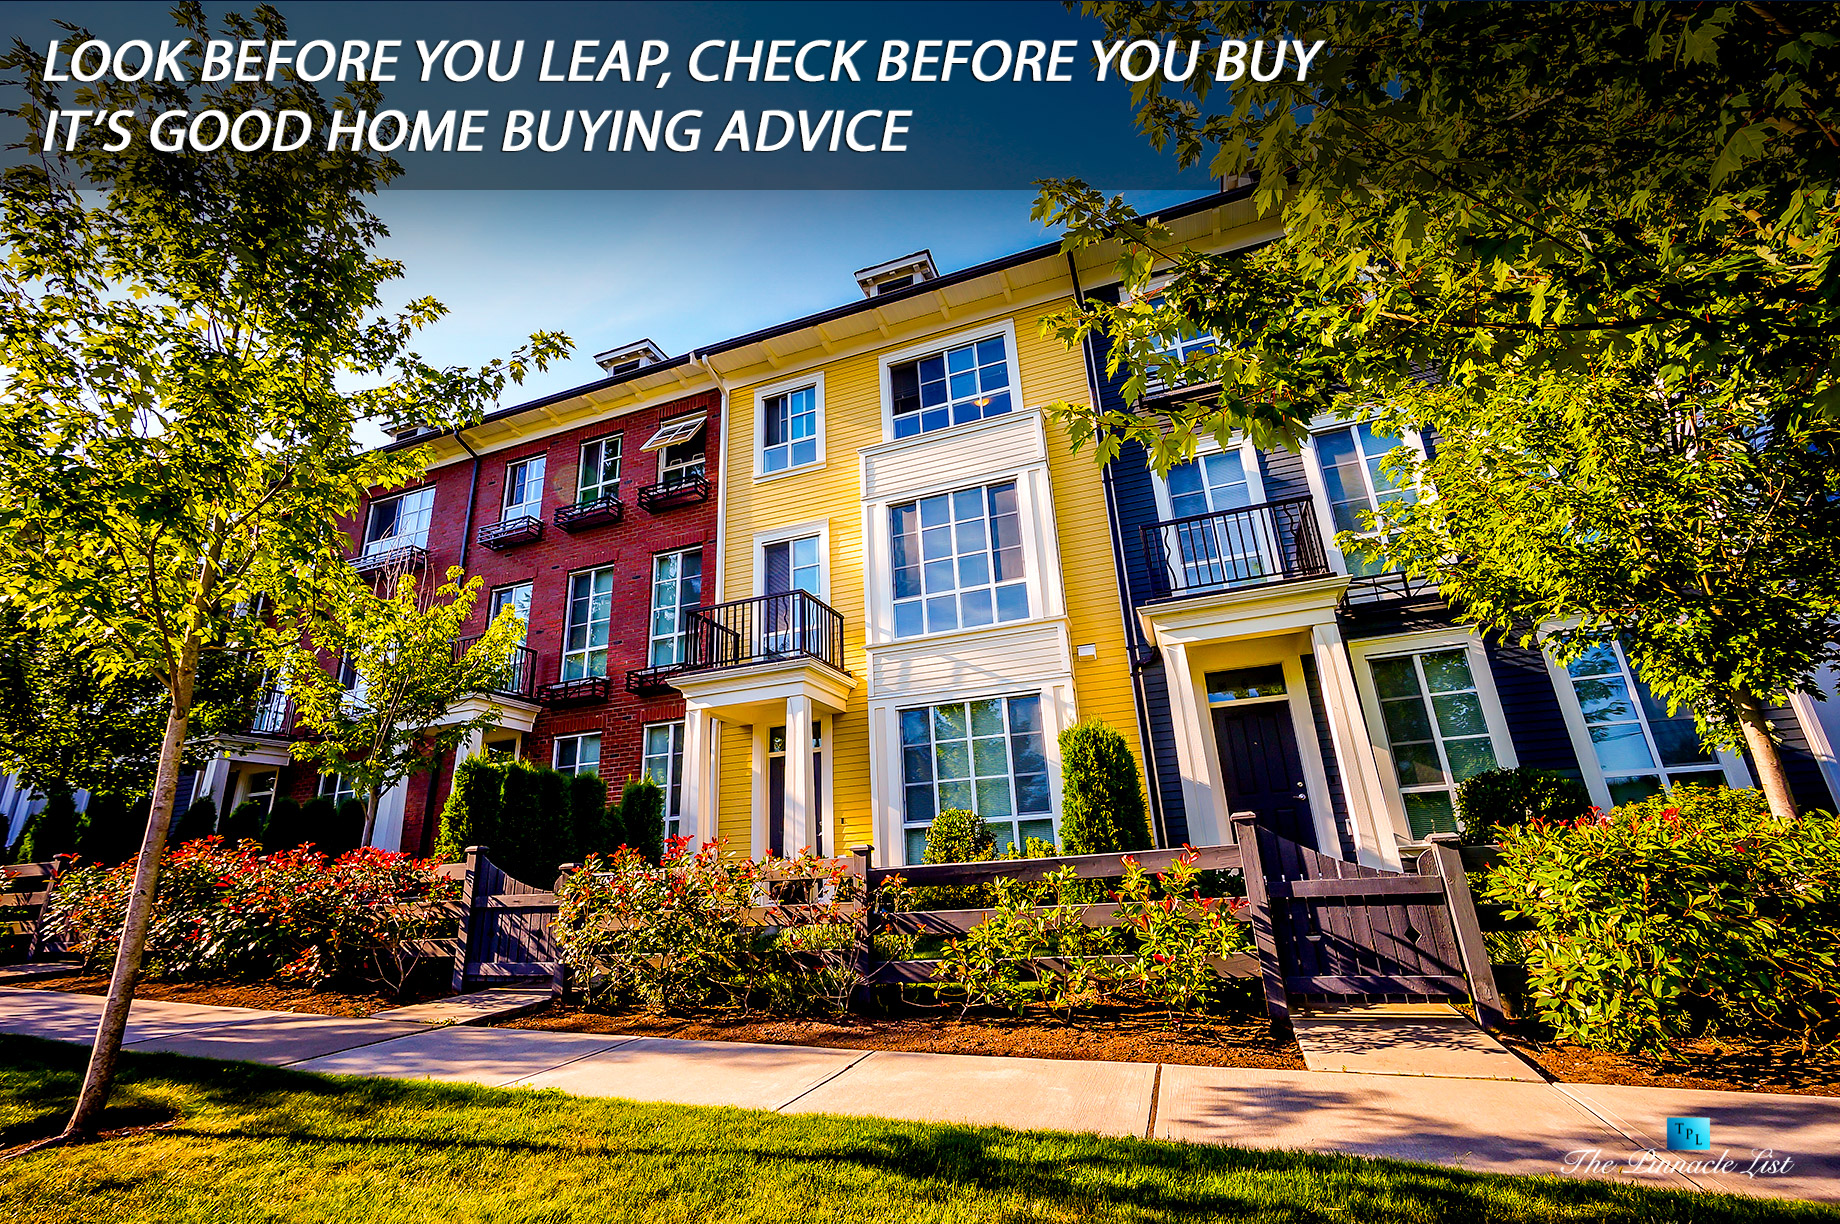 Look Before You Leap, Check Before You Buy – It’s Good Home Buying Advice